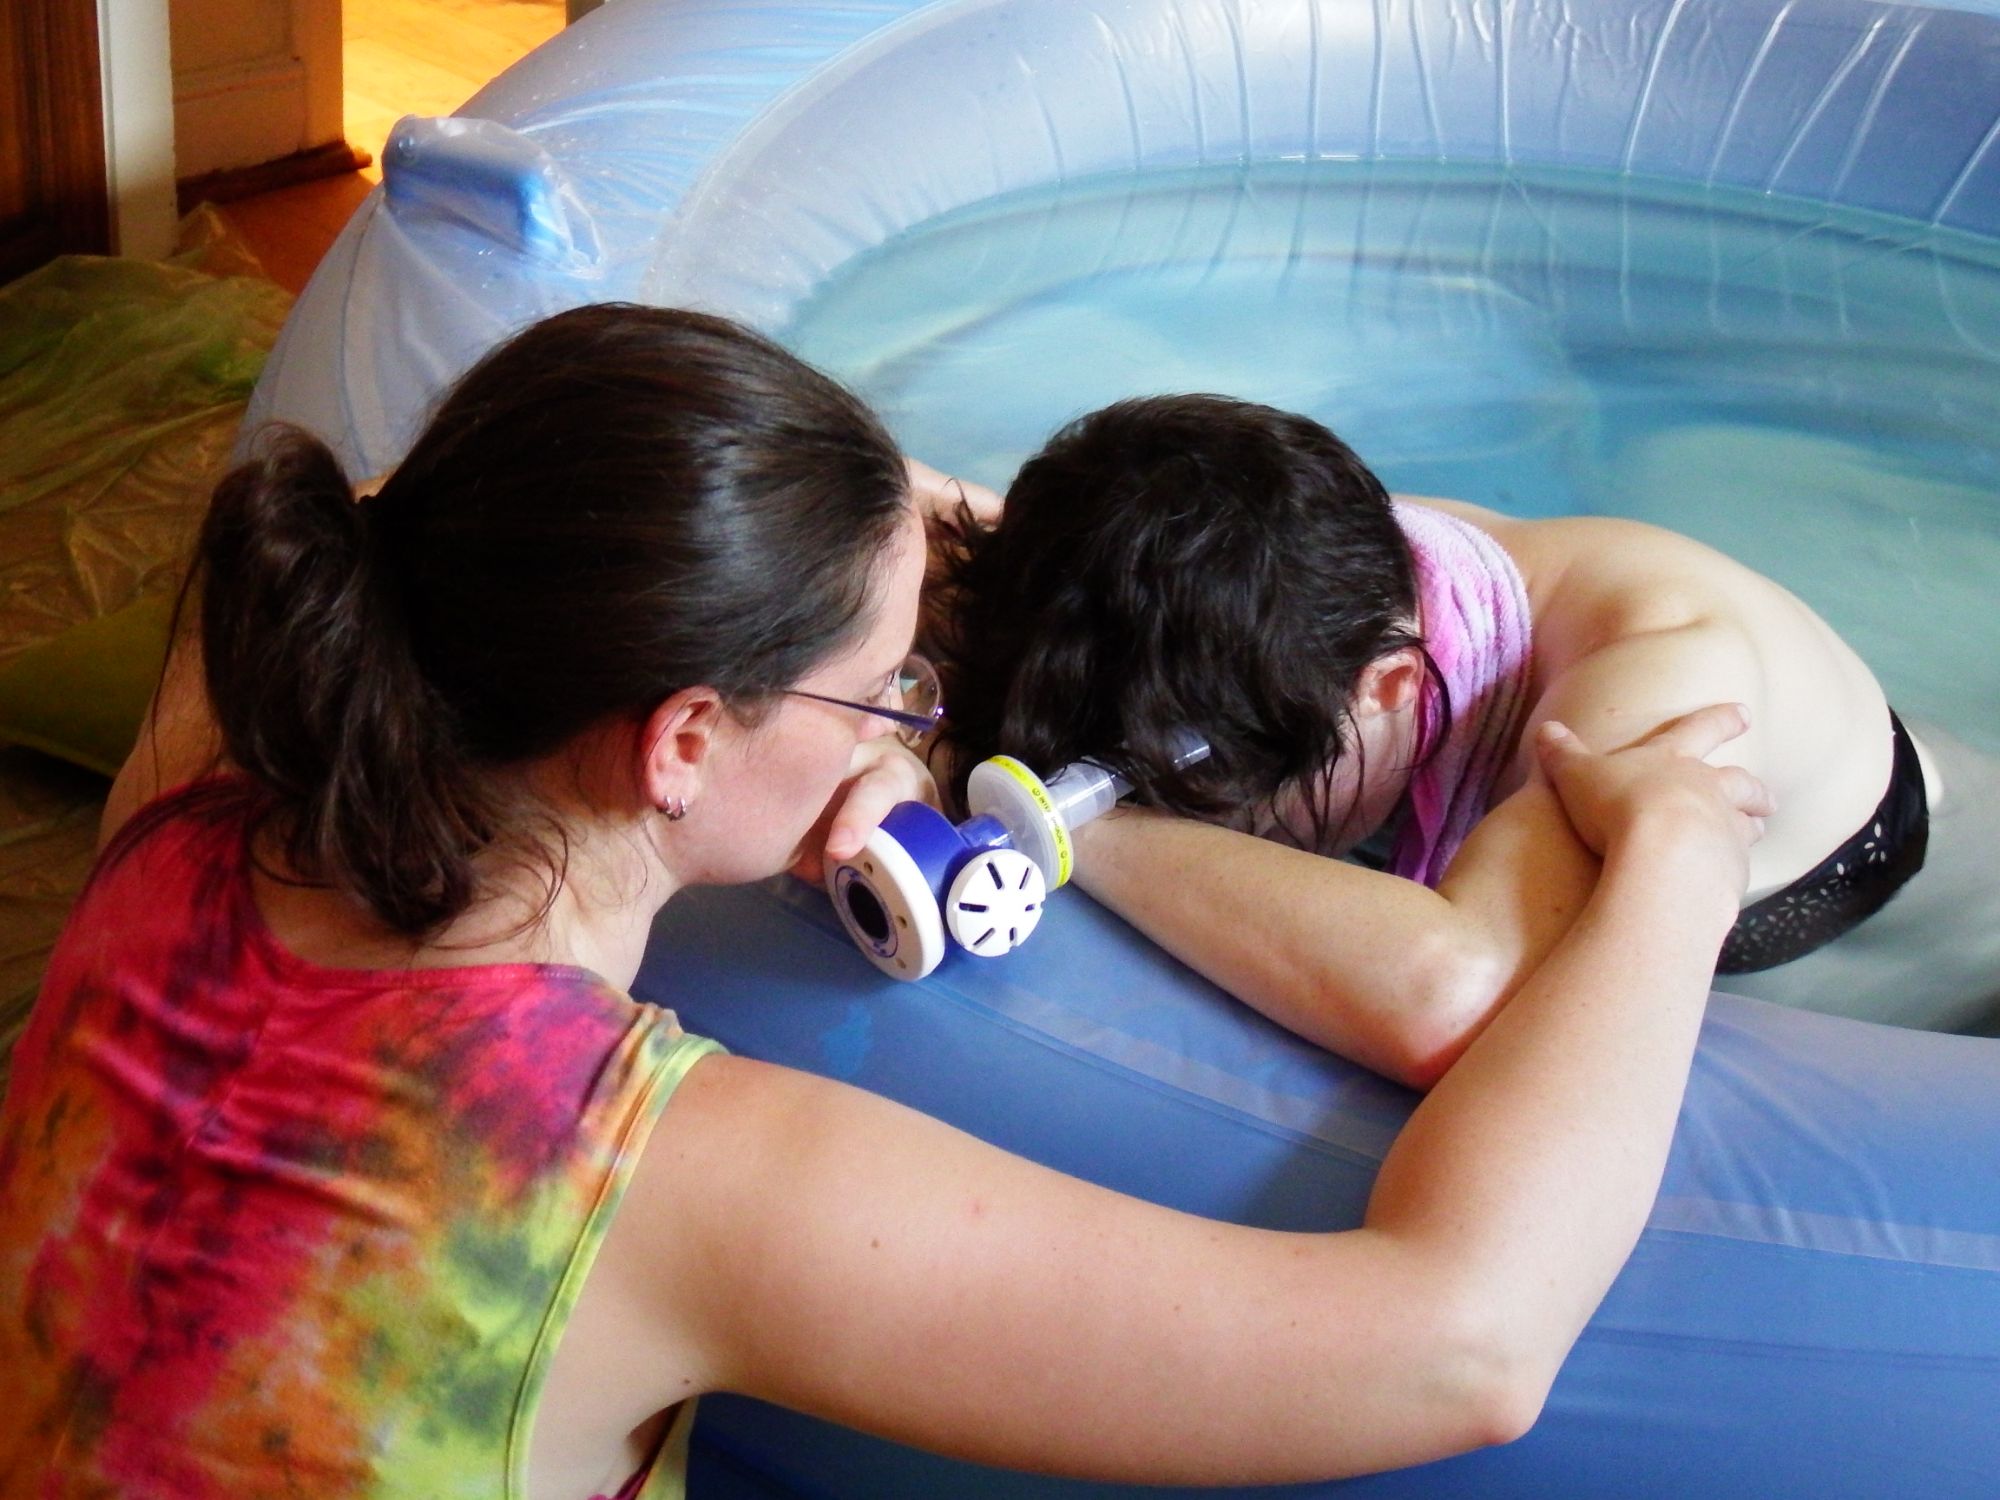 Image of Caz with her arms round a labouring woman in a birth pool.